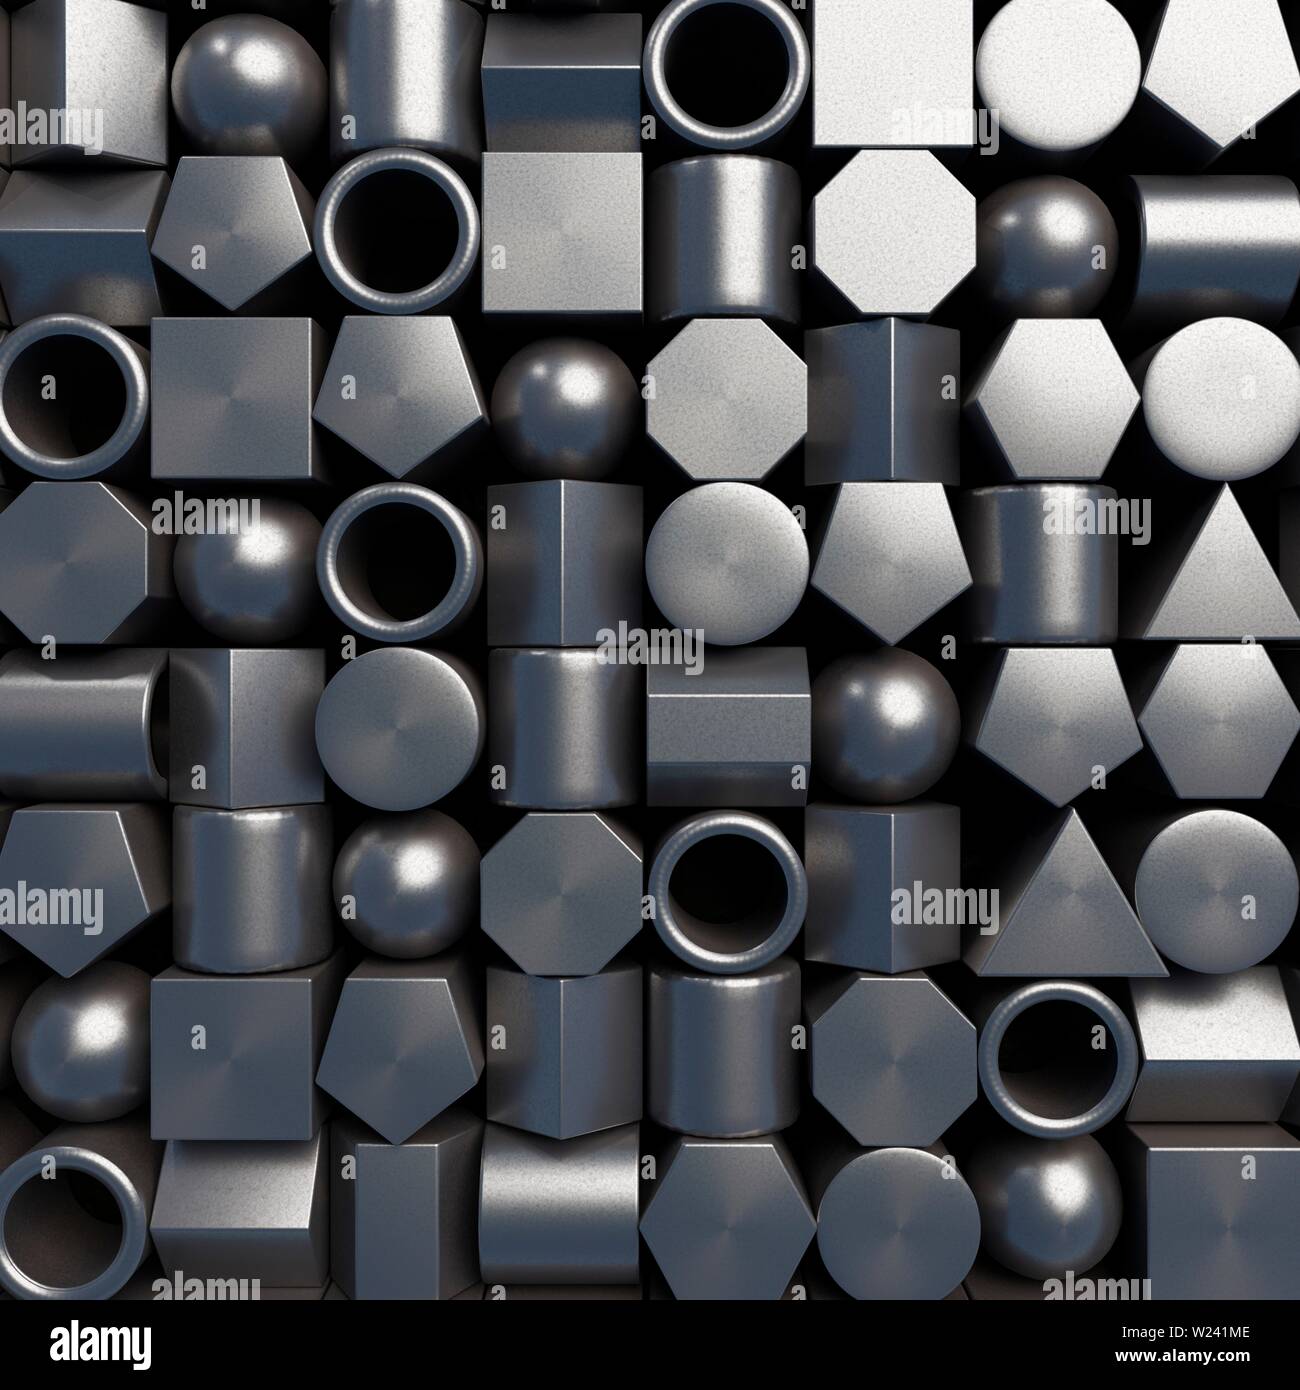 Large group of geometric objects made of metal, computer illustration. Stock Photo